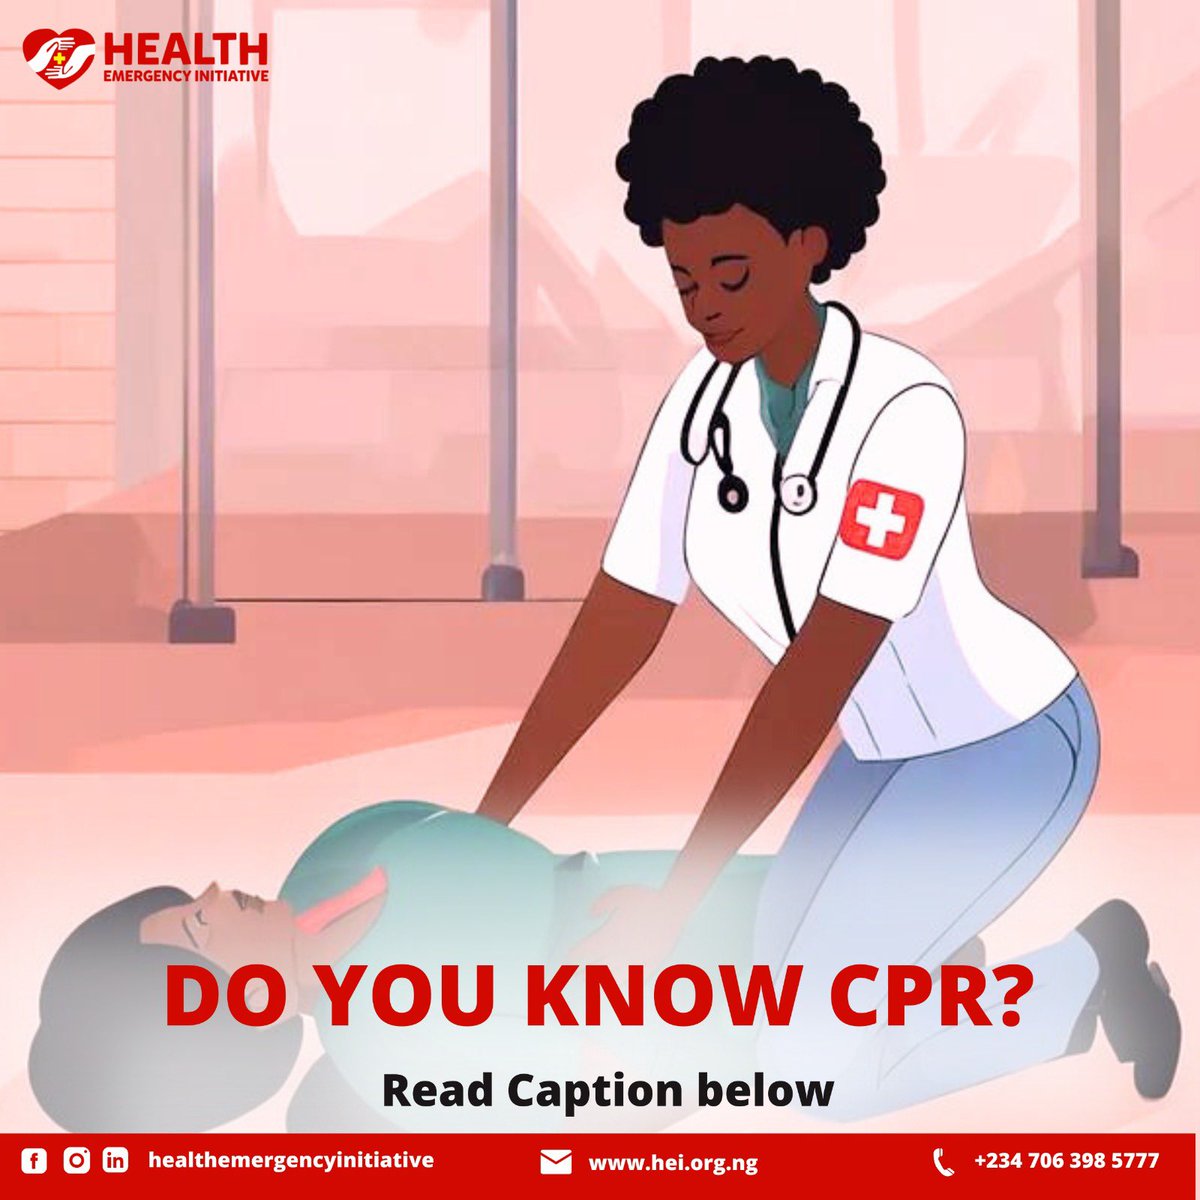 'Every second counts. Learning CPR turns bystanders into heroes. Be prepared to save lives. Take action today. 

Visit: hei.org.ng/get-involved/

#thatnoneshoulddie #ngofund #helpout #liveandnotdie #hei #charity #donate #lifesaver #cpr